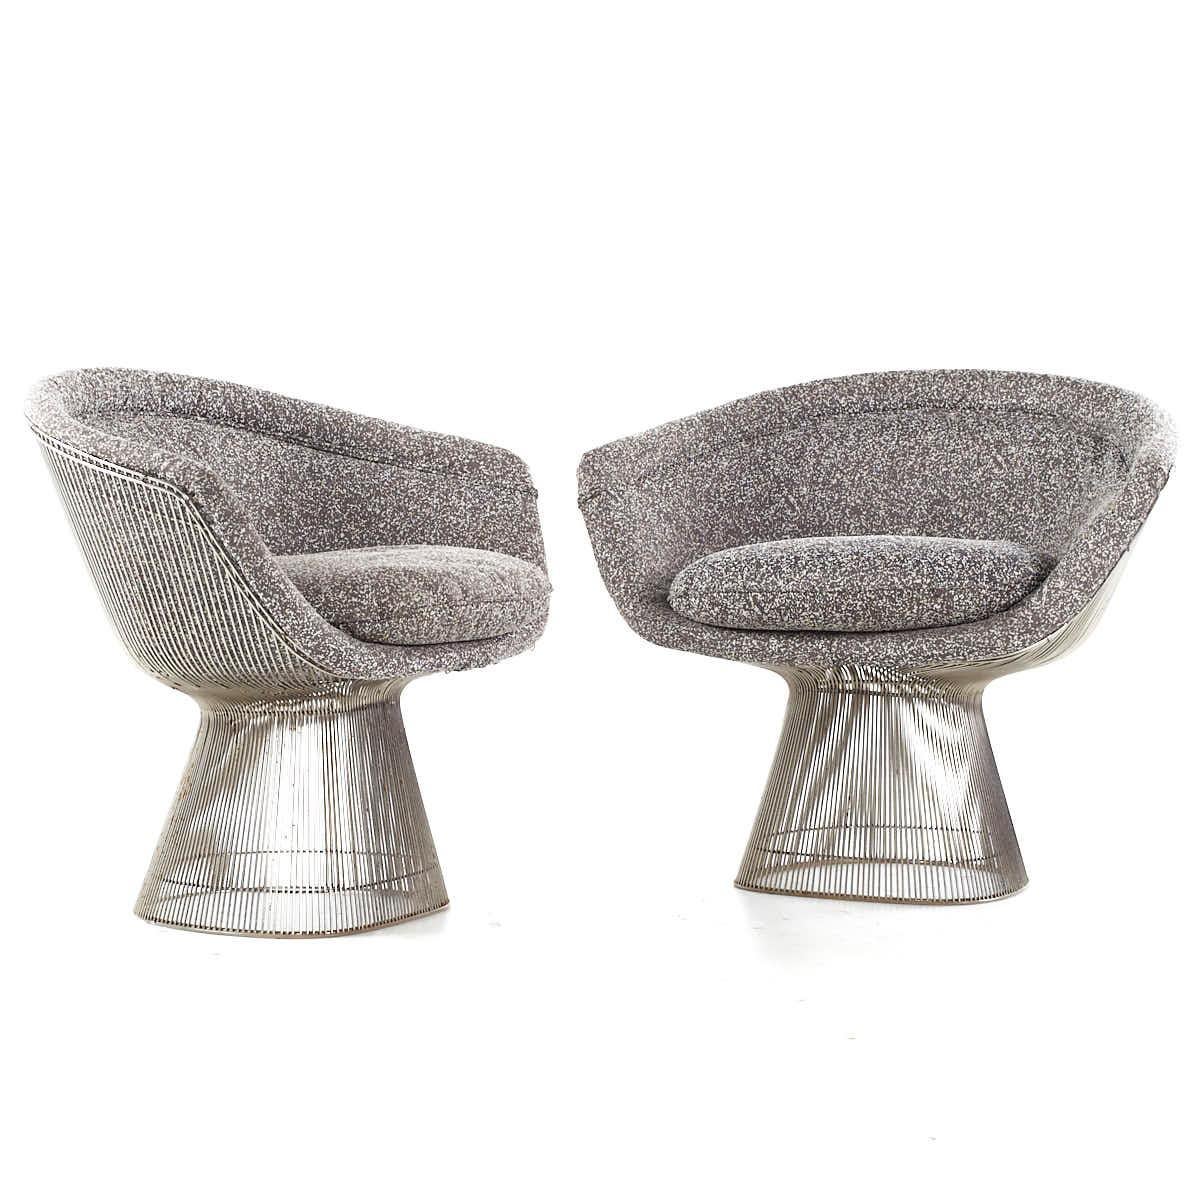 Warren Platner for Knoll Mid Century Lounge Chairs – Pair

Each chair measures: 36 wide x 27 deep x 30.5 high, with a seat height of 20 and arm height/chair clearance 26 inches

All pieces of furniture can be had in what we call restored vintage